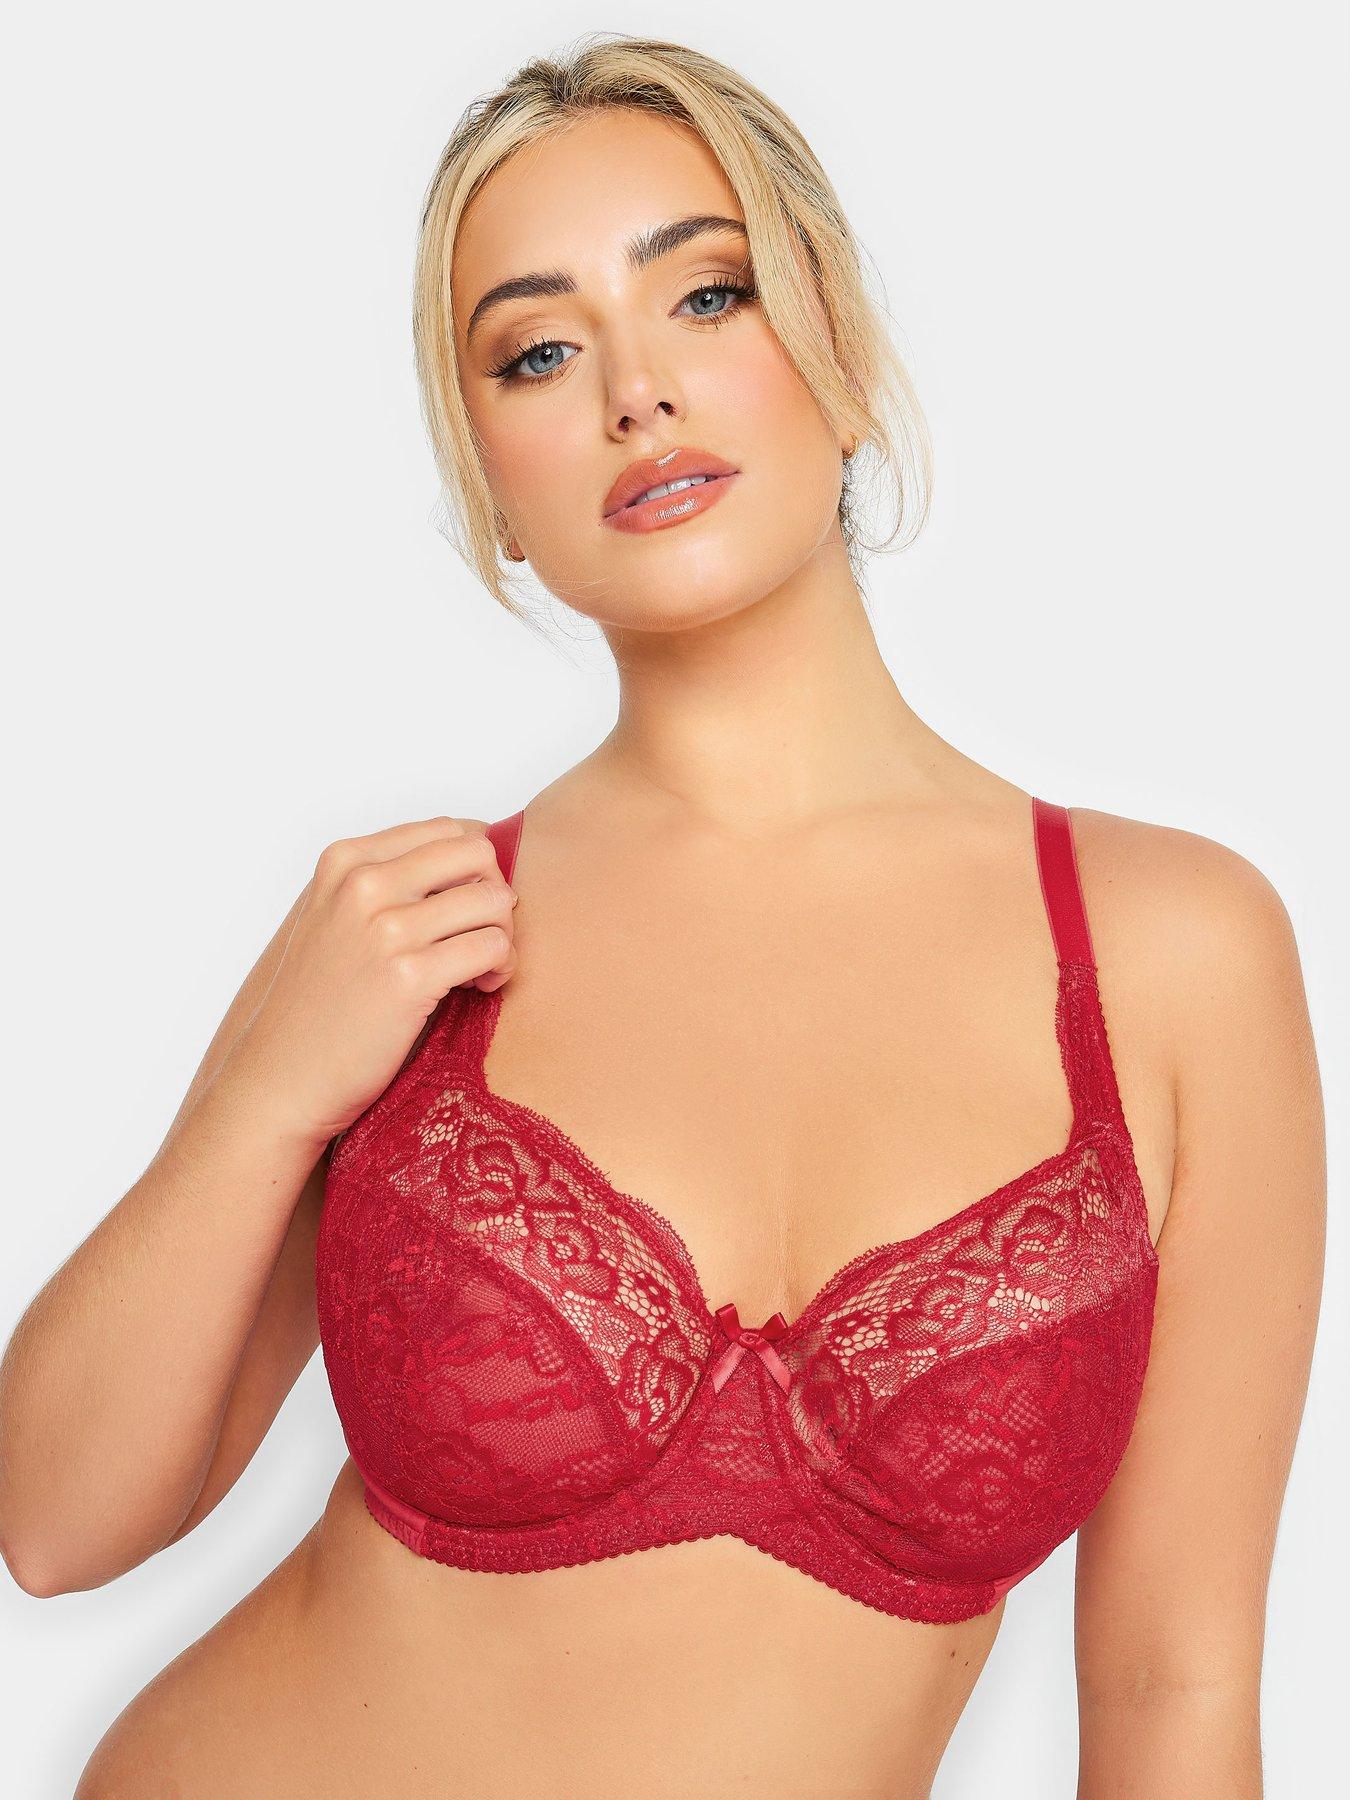 Sexy Hot Red bsc Push Up Lace front Open/closure Bra Underwear Lingerie,  Women's Fashion, New Undergarments & Loungewear on Carousell